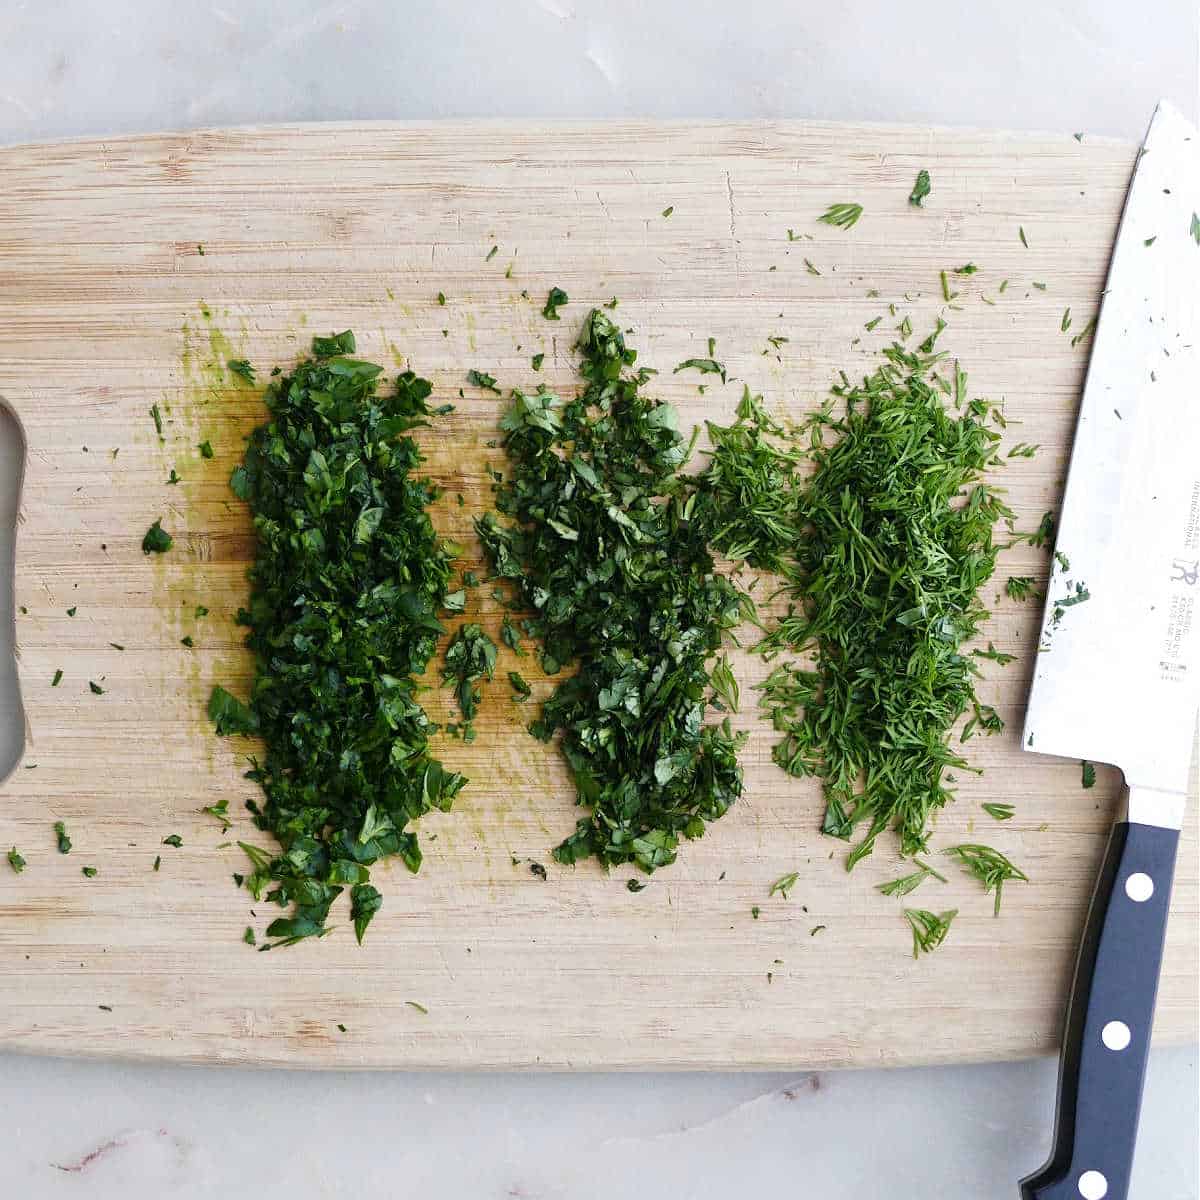 dill, parsley, and cilantro chopped into small pieces on a cutting board with a knife